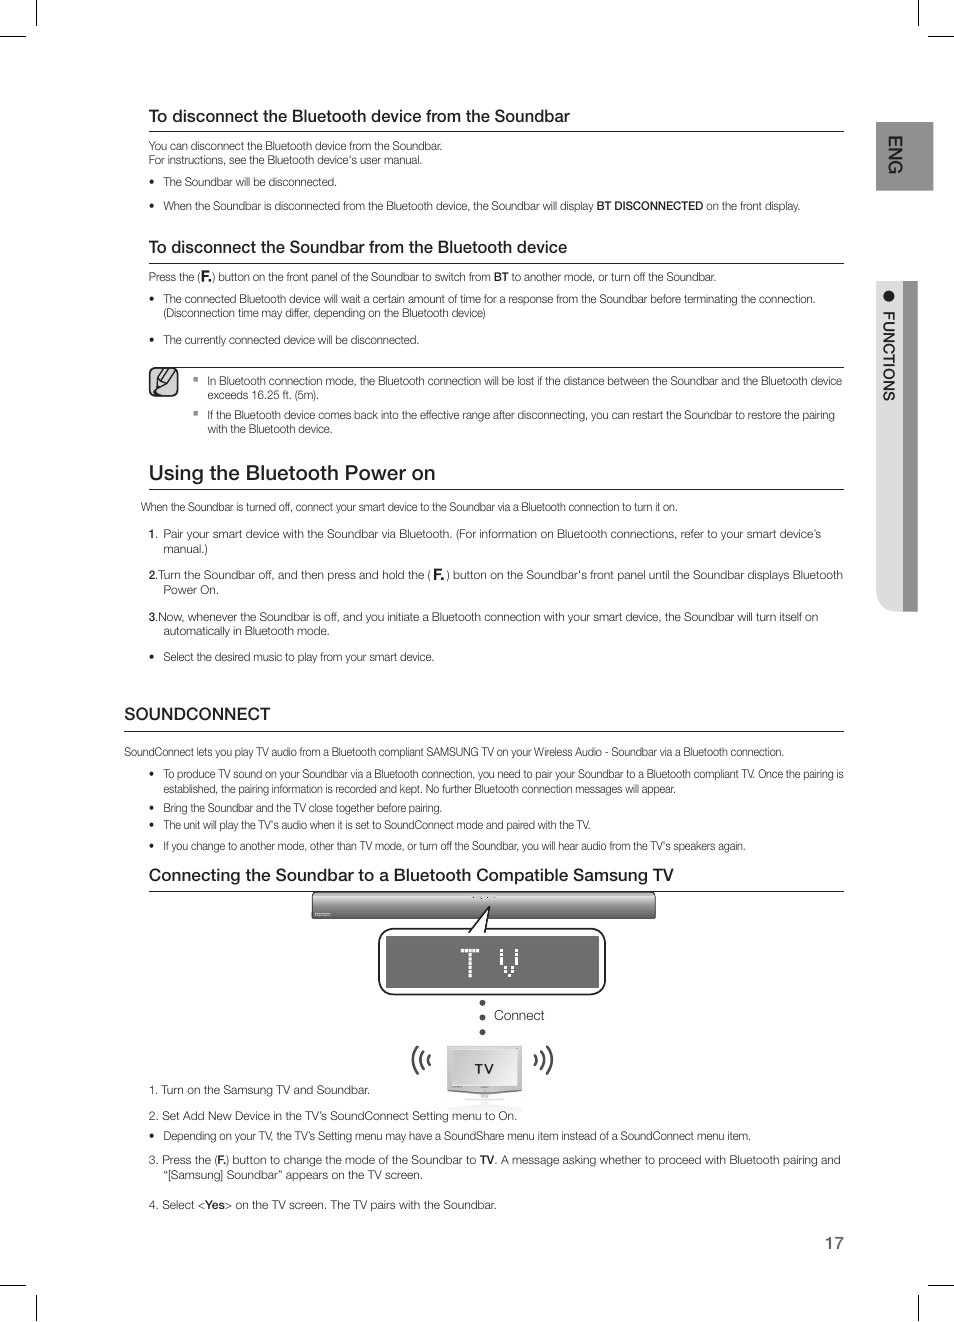 Soundconnect, Using the bluetooth power on | Samsung HW-H550-ZA User Manual  | Page 17 / 26